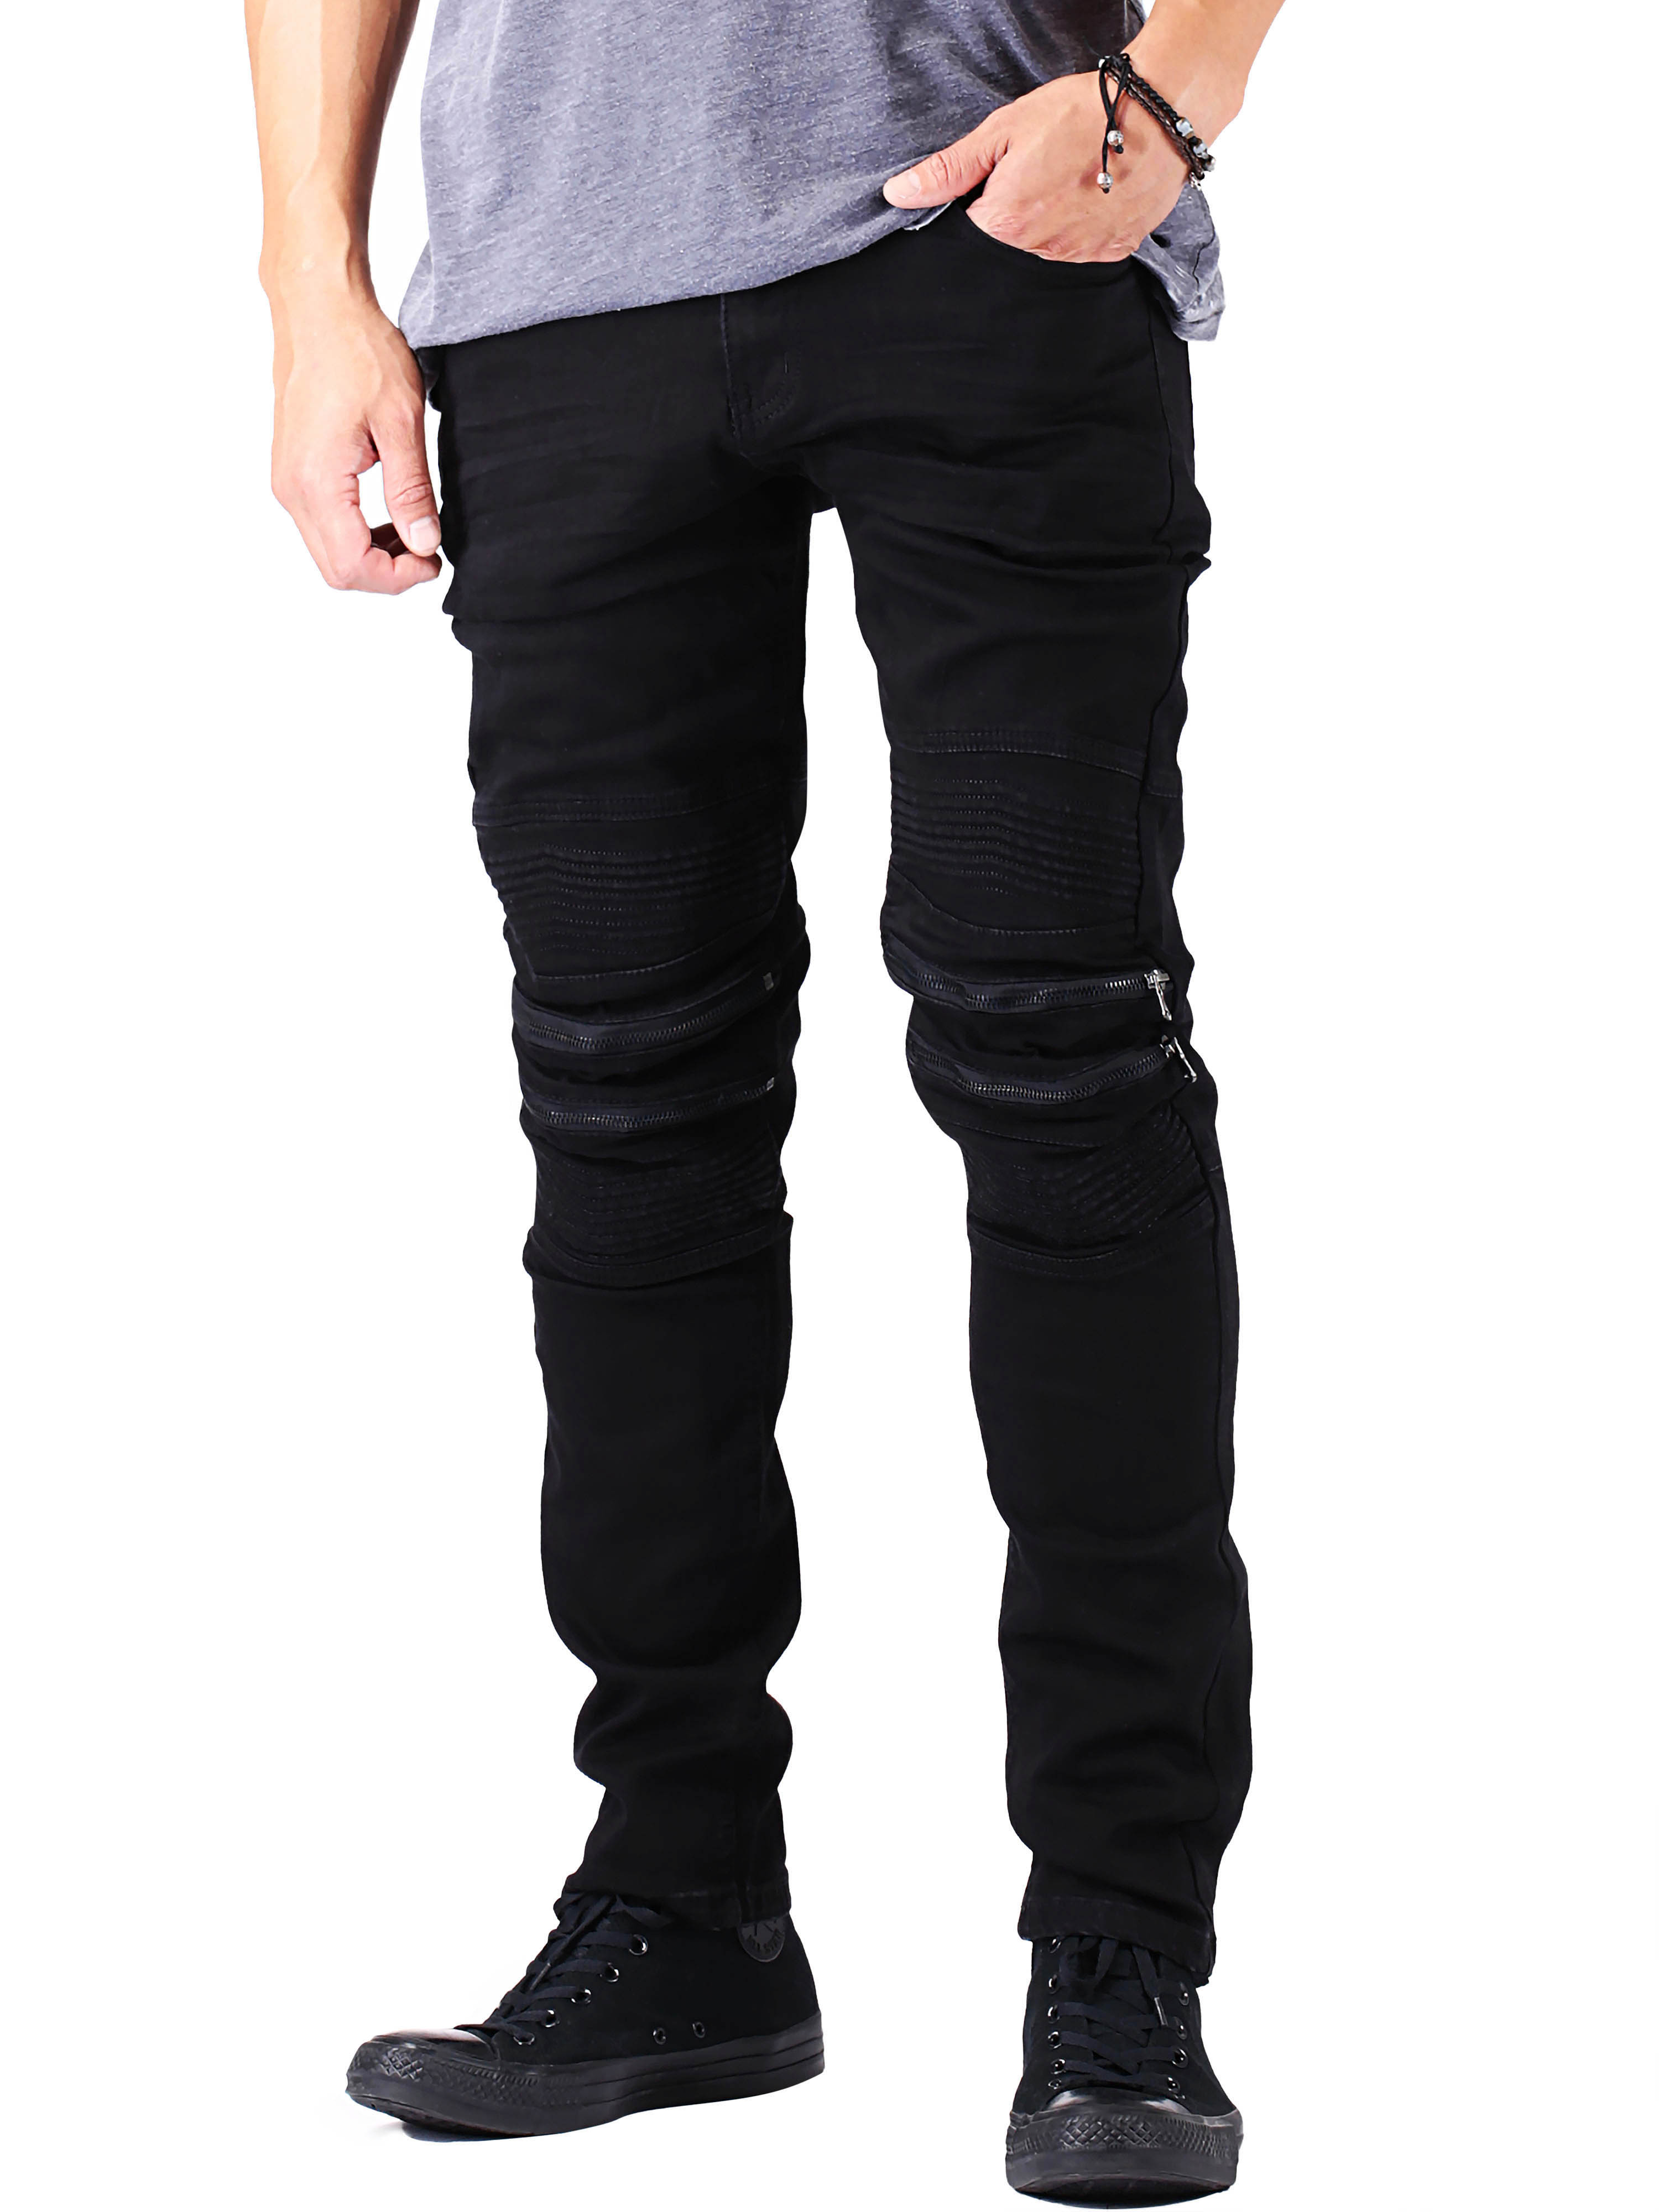 Ma Croix Mens Distressed Skinny Fit Denim Jeans with Zipper Pocket - image 1 of 6